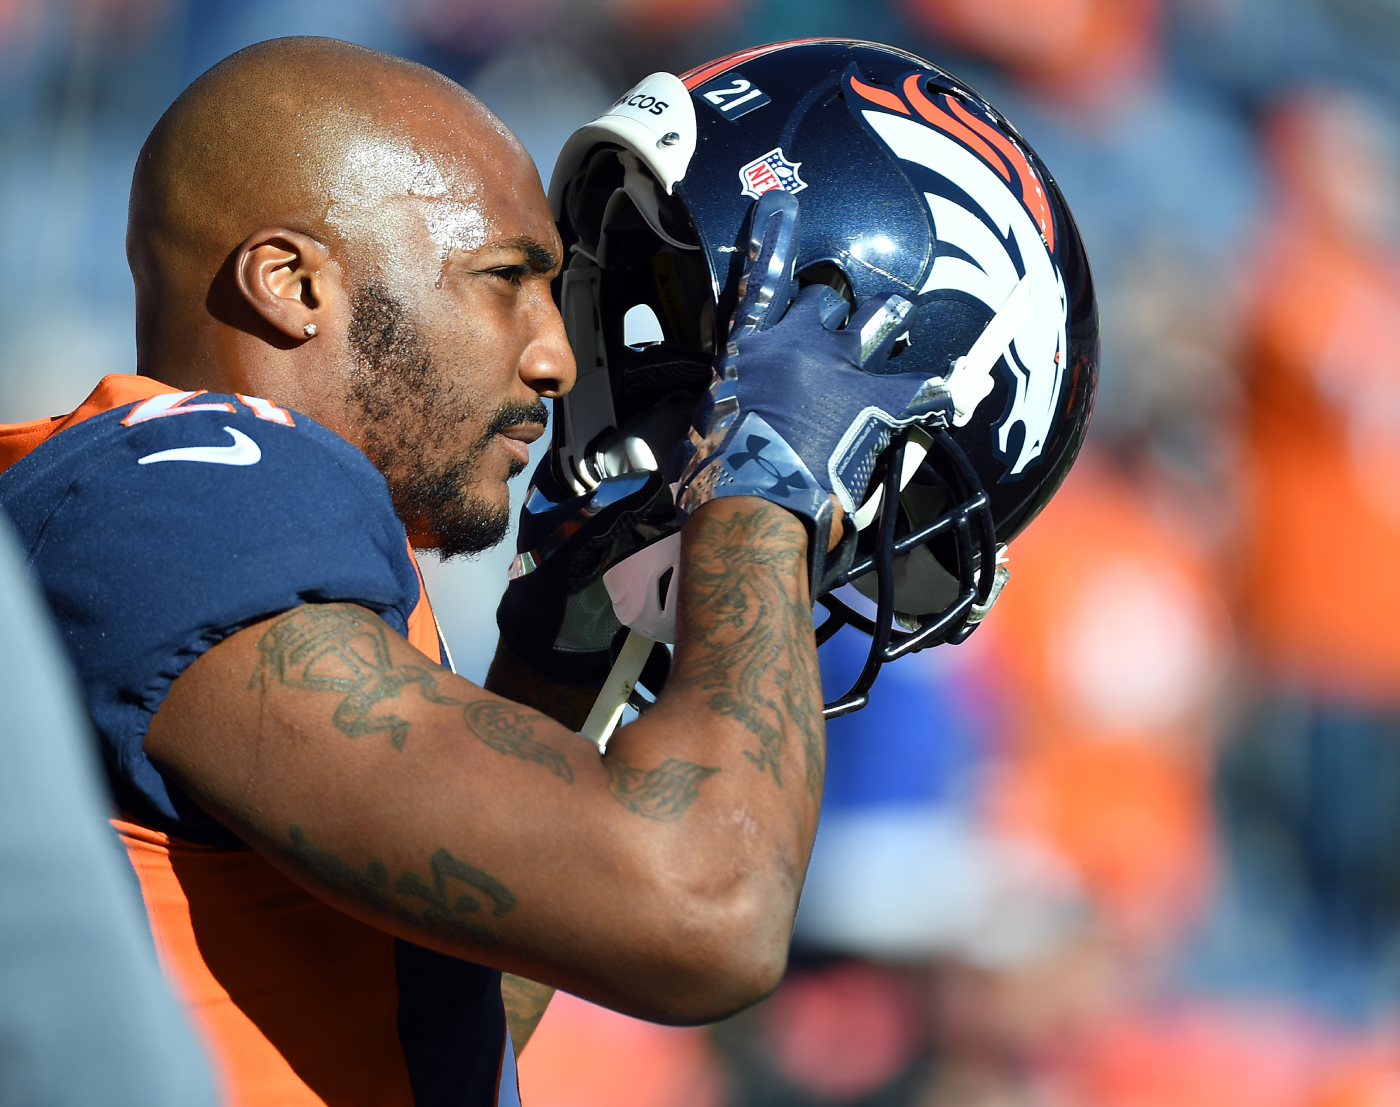 Aqib Talib described what it was like to play football on Adderall.